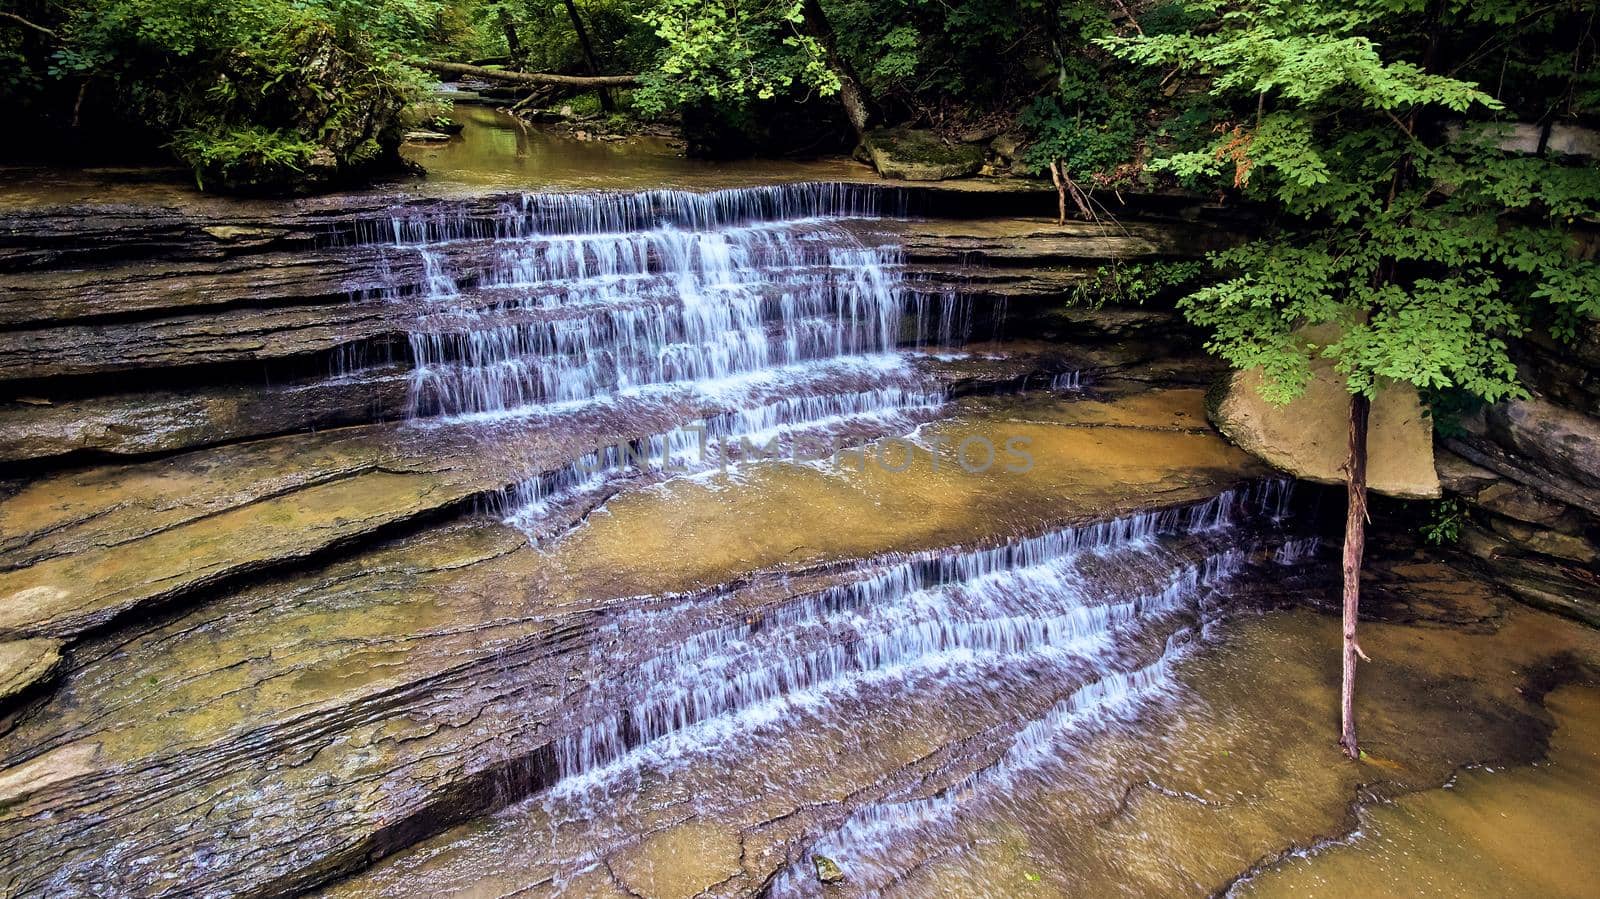 Image of Tiers of rock with waterfalls pouring over in woods